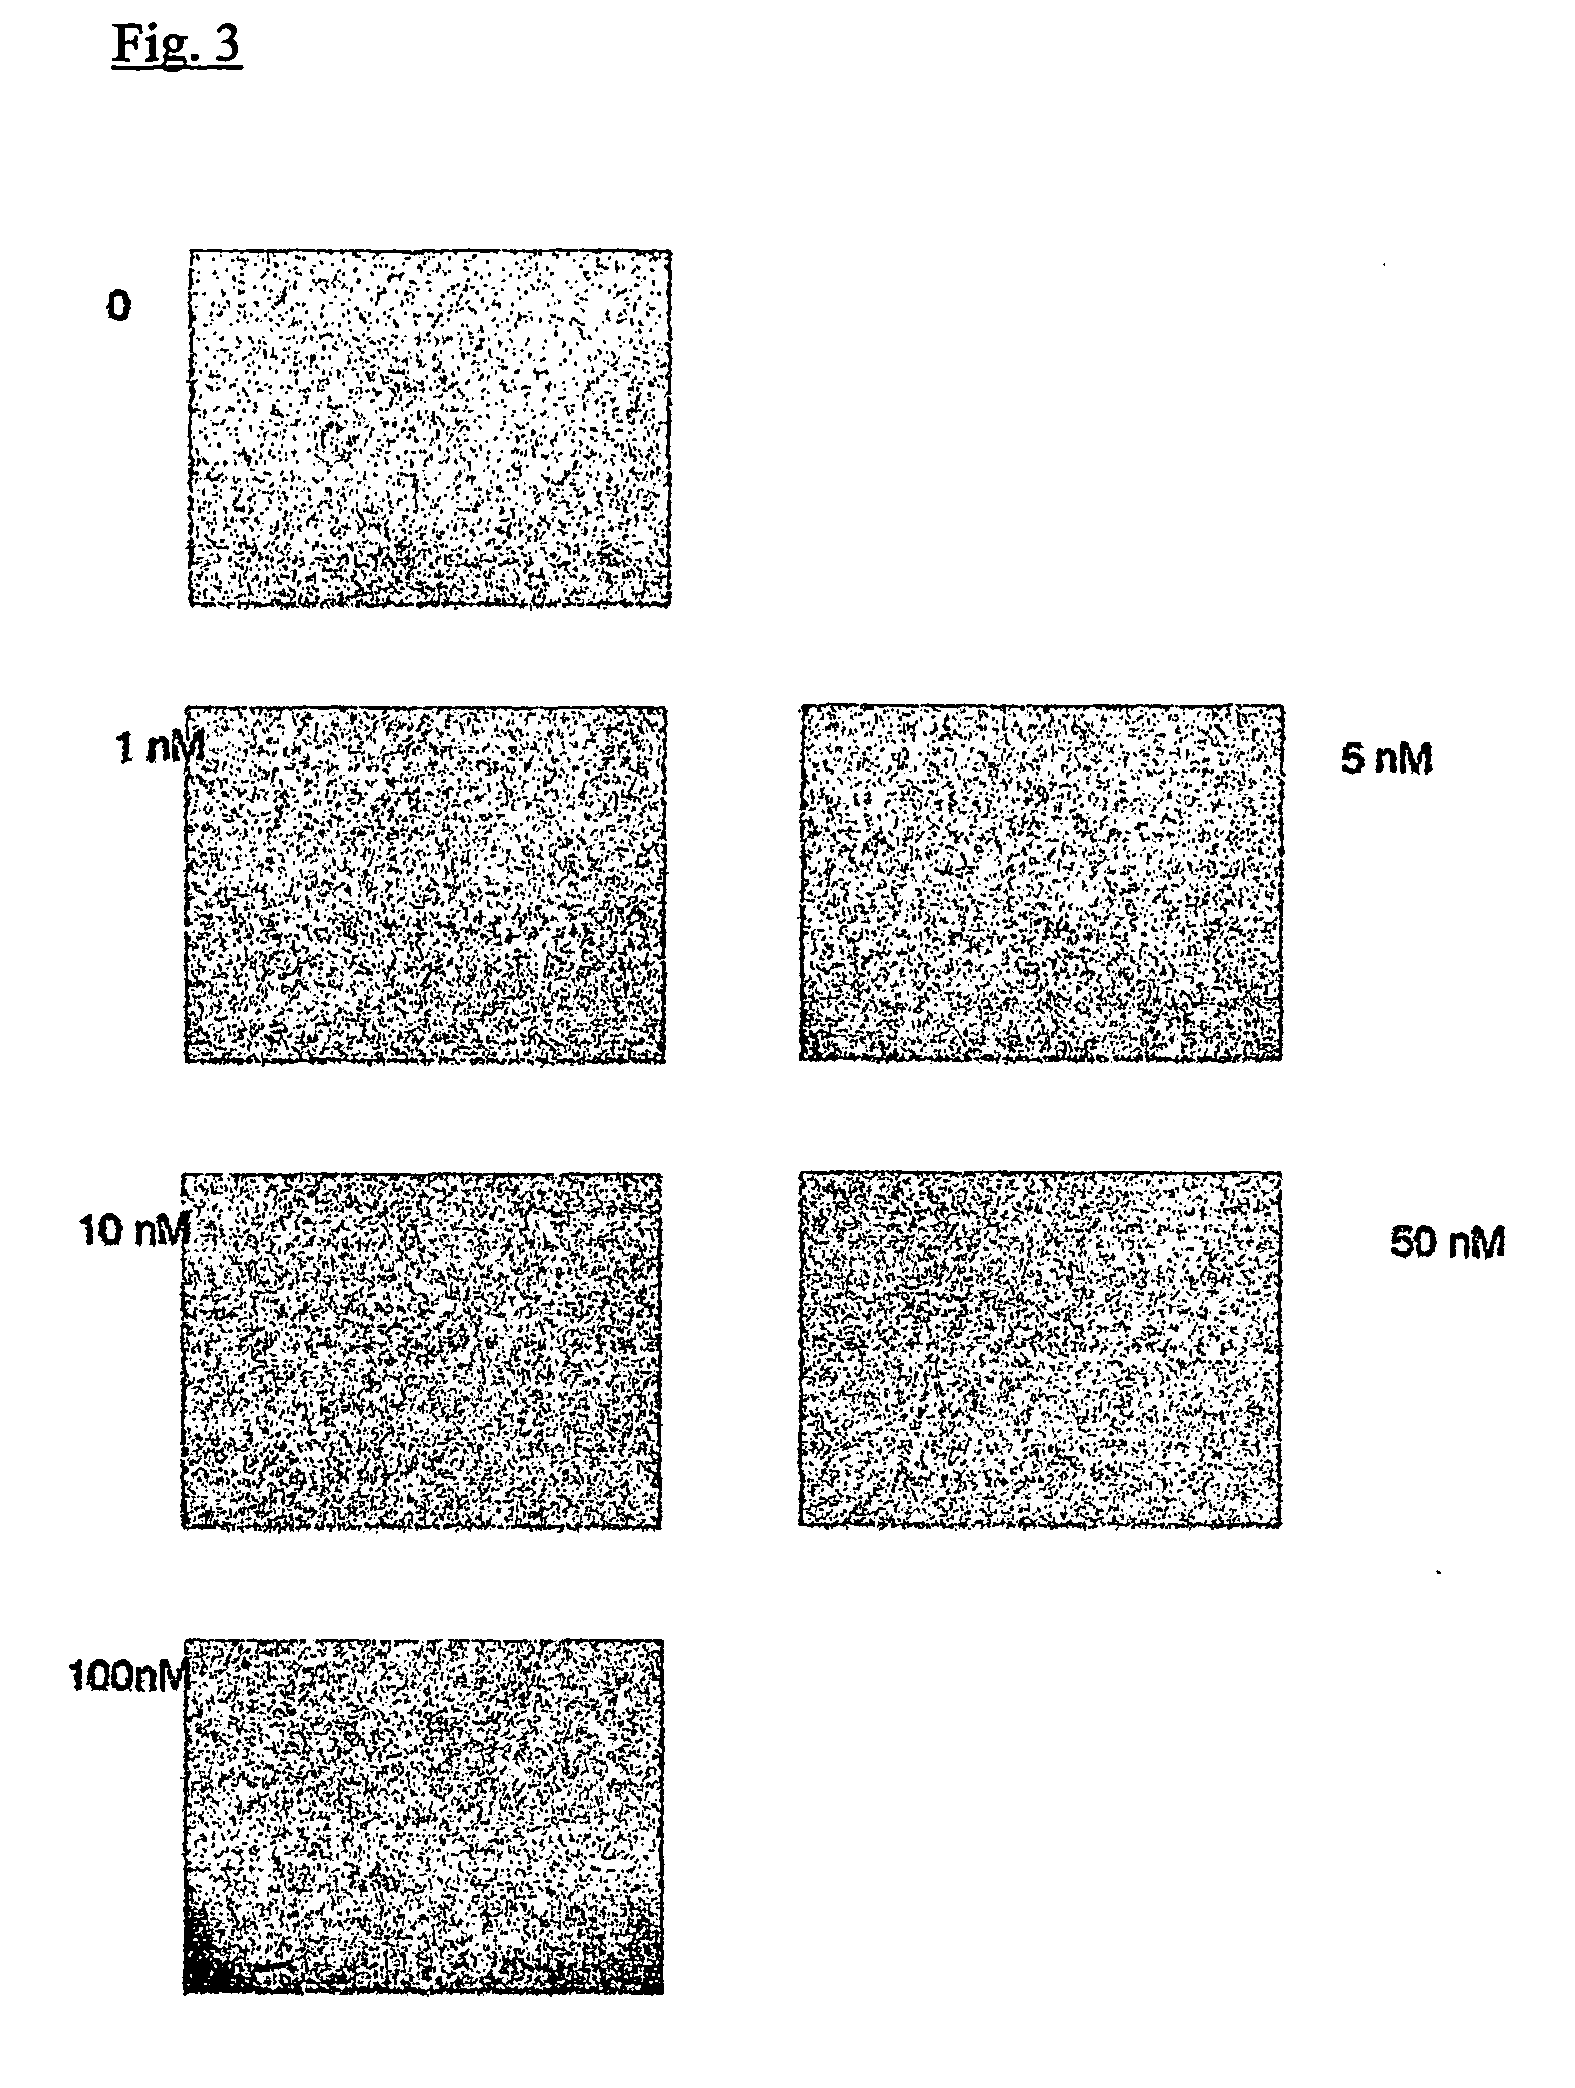 Pharmaceutical compositions for inhibiting metal ion dependent enzymatic activity and methods for the use thereof